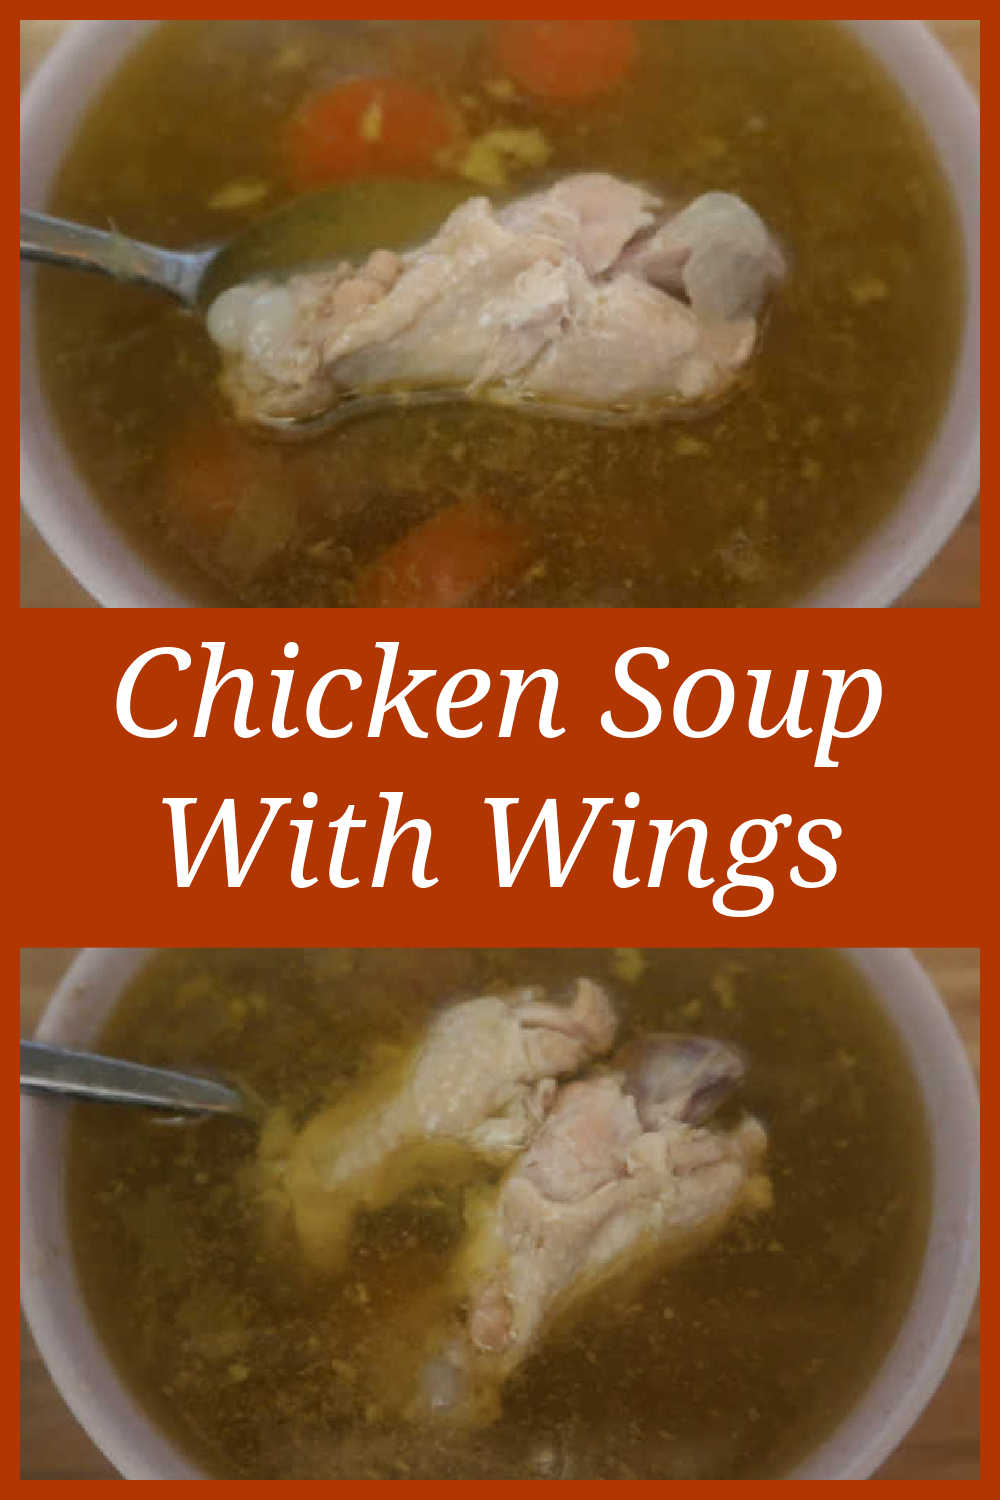 Chicken Soup With Wings Recipe - How to make the best easy chicken broth or homemade stock from scratch - with the video tutorial. 